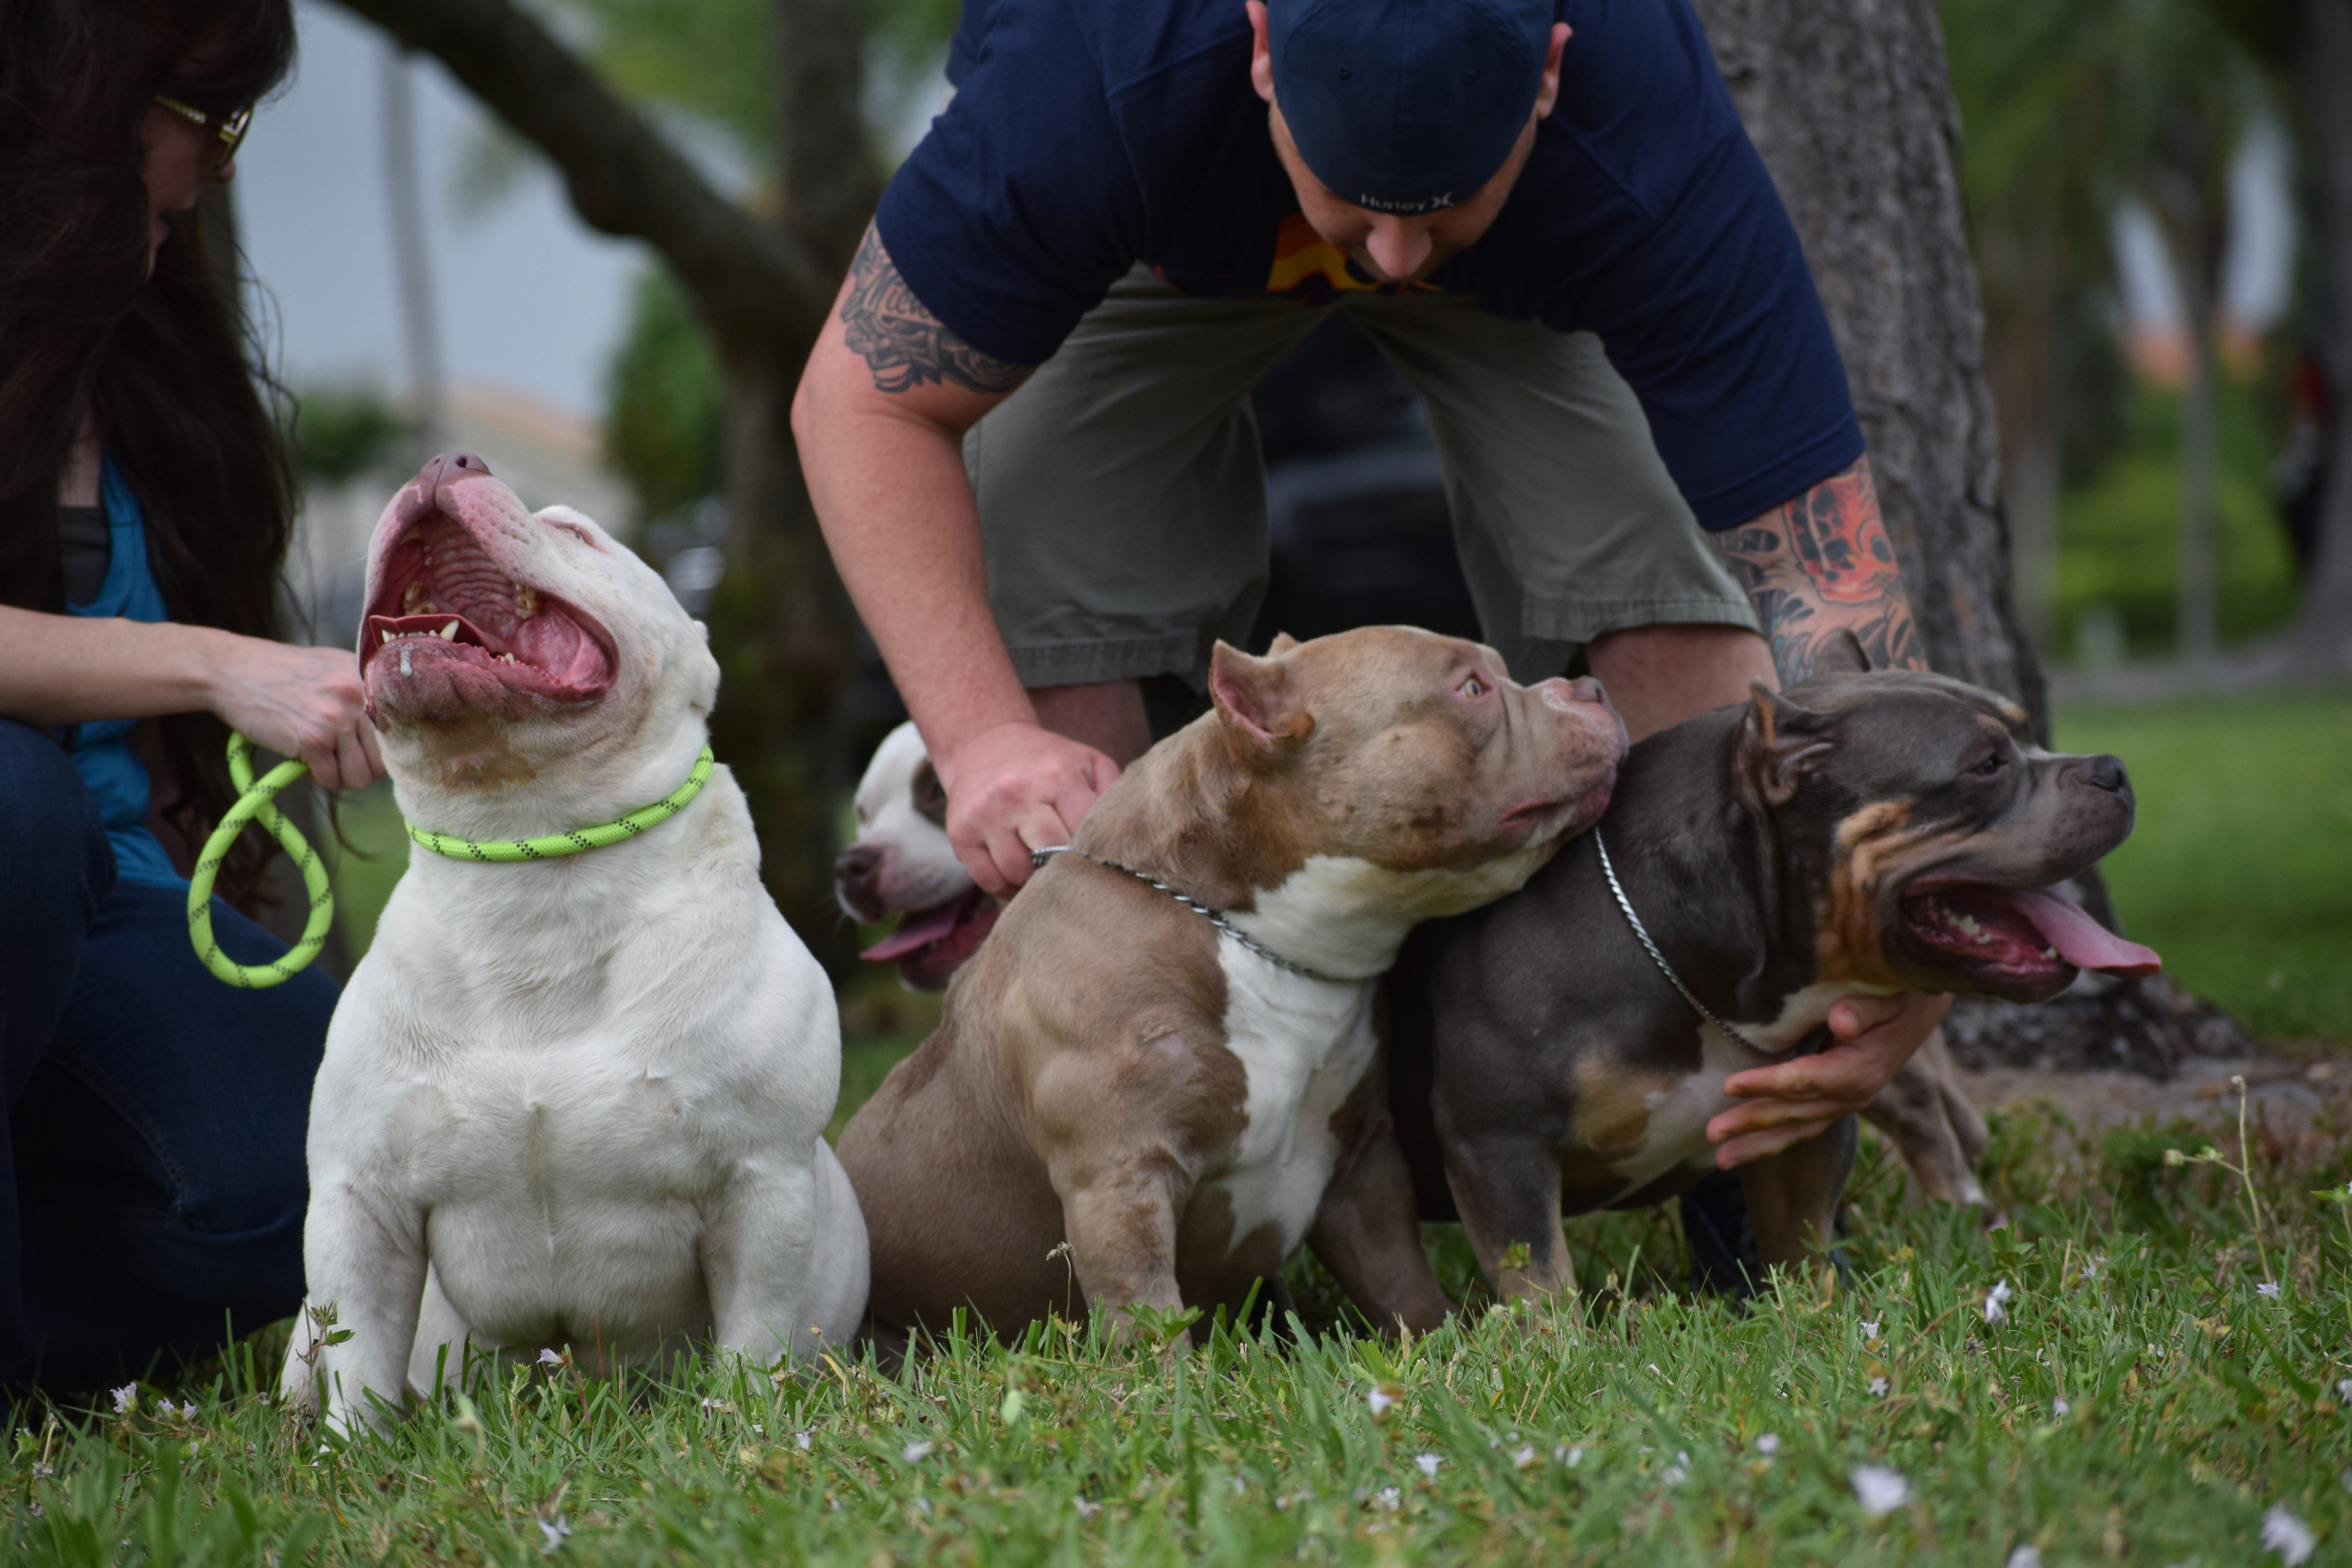 20 Dogs that Use Bully Max - Results You Have to See to Believe